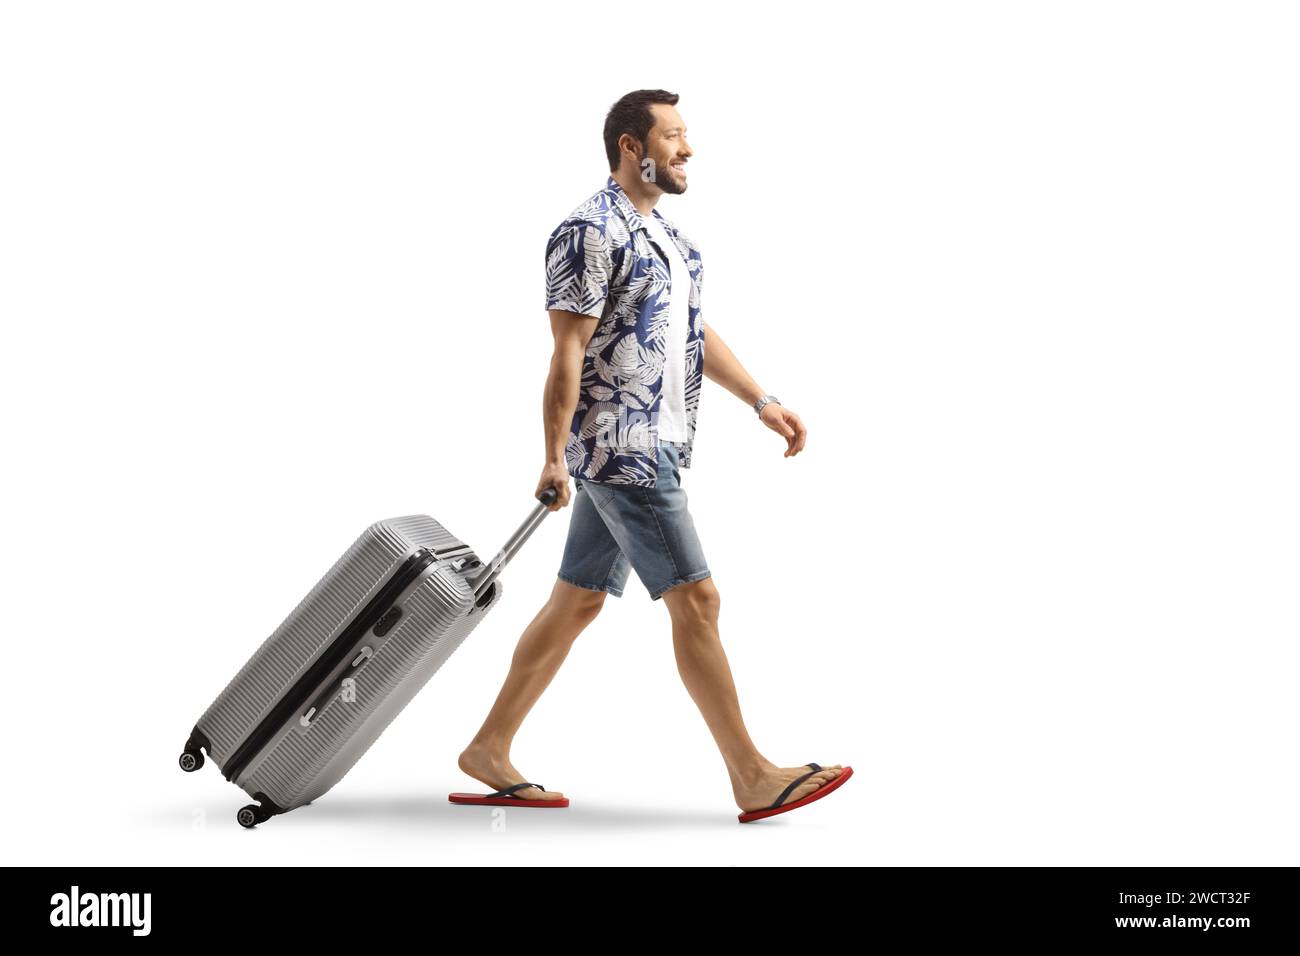 Man in flip-flops pulling a suitcase smiling and walking isolated on white background Stock Photo